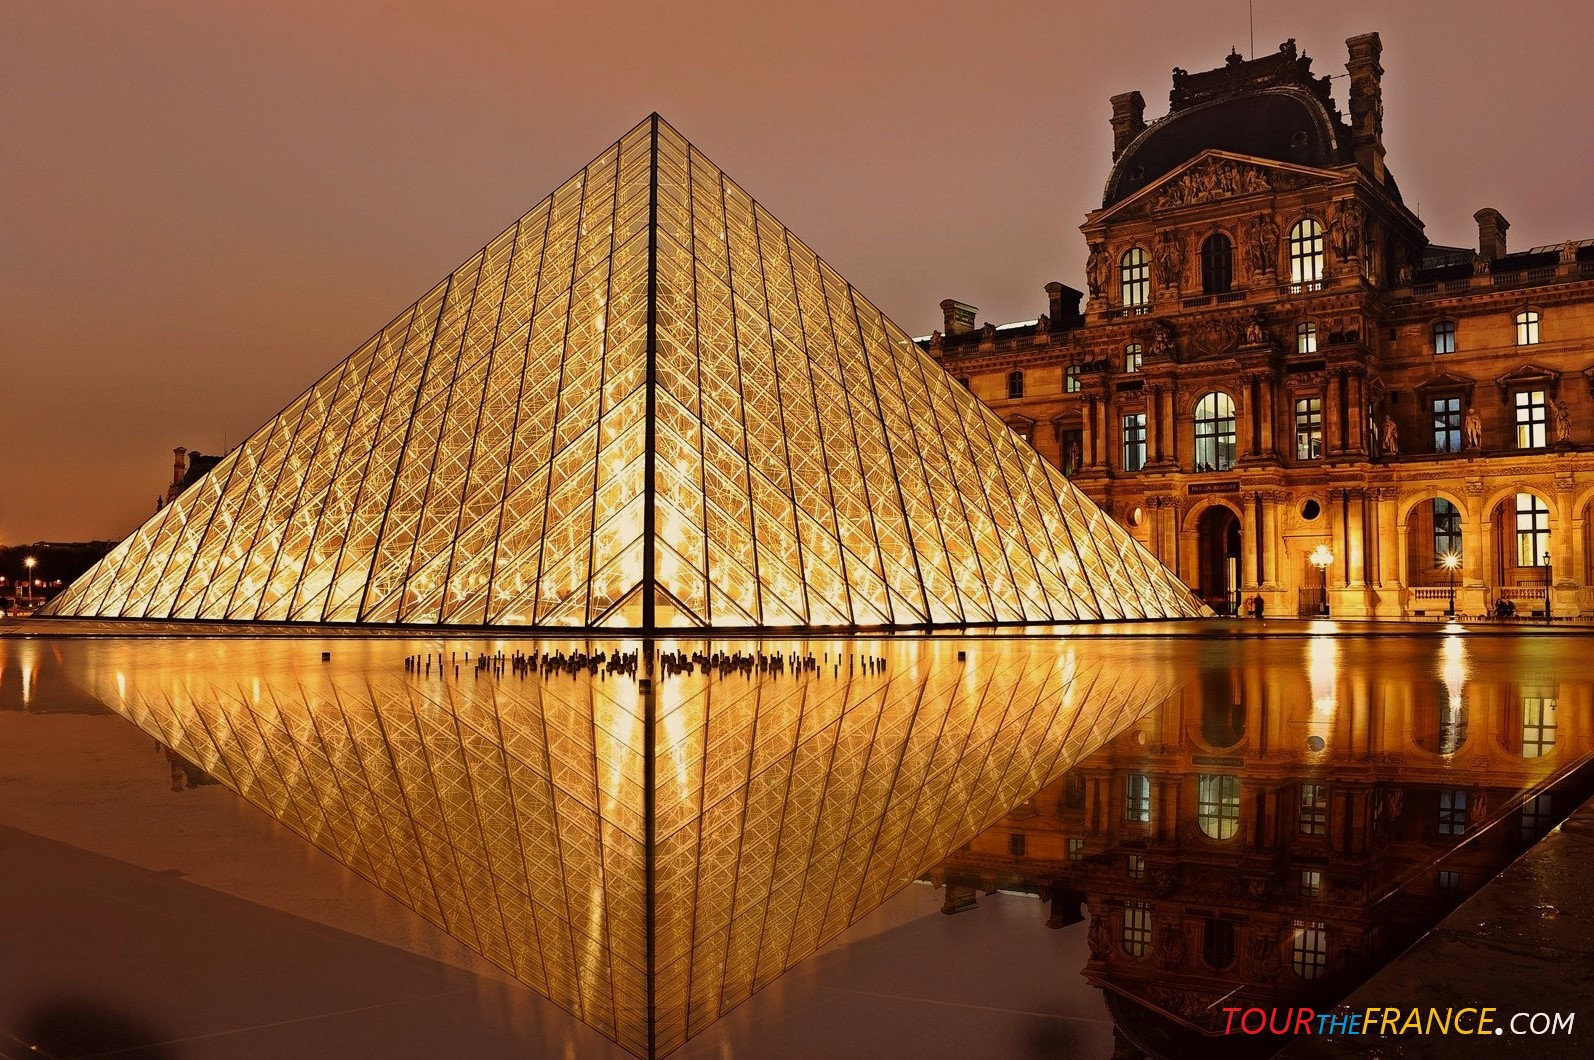 /000001a/pic/tourthefrance+002+louvre.jpg